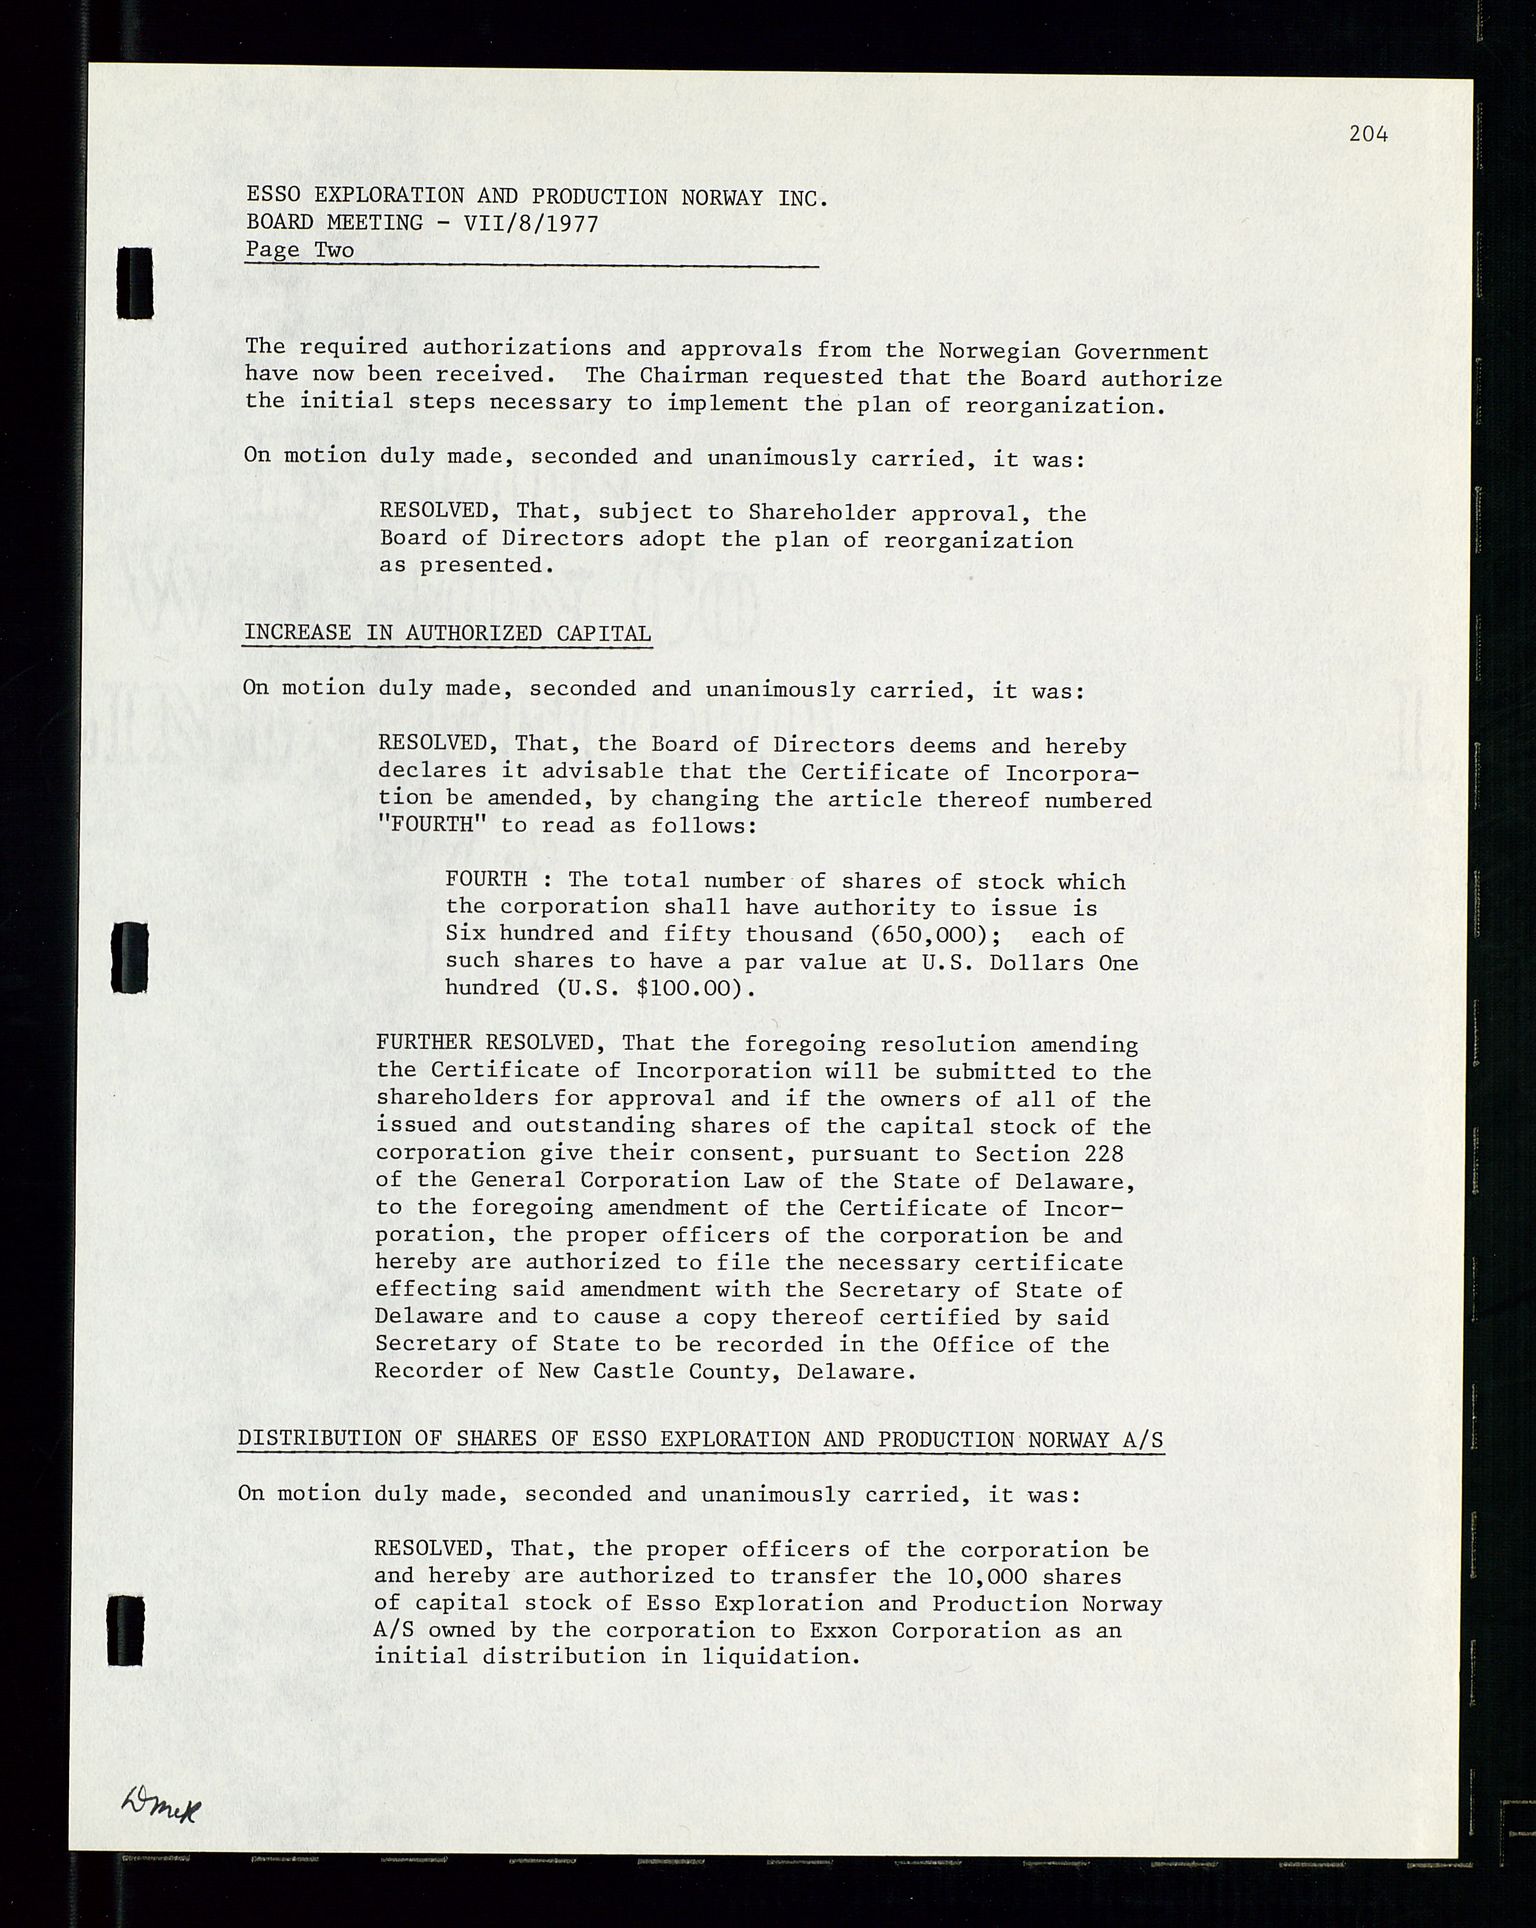 Pa 1512 - Esso Exploration and Production Norway Inc., SAST/A-101917/A/Aa/L0001/0002: Styredokumenter / Corporate records, Board meeting minutes, Agreements, Stocholder meetings, 1975-1979, s. 55